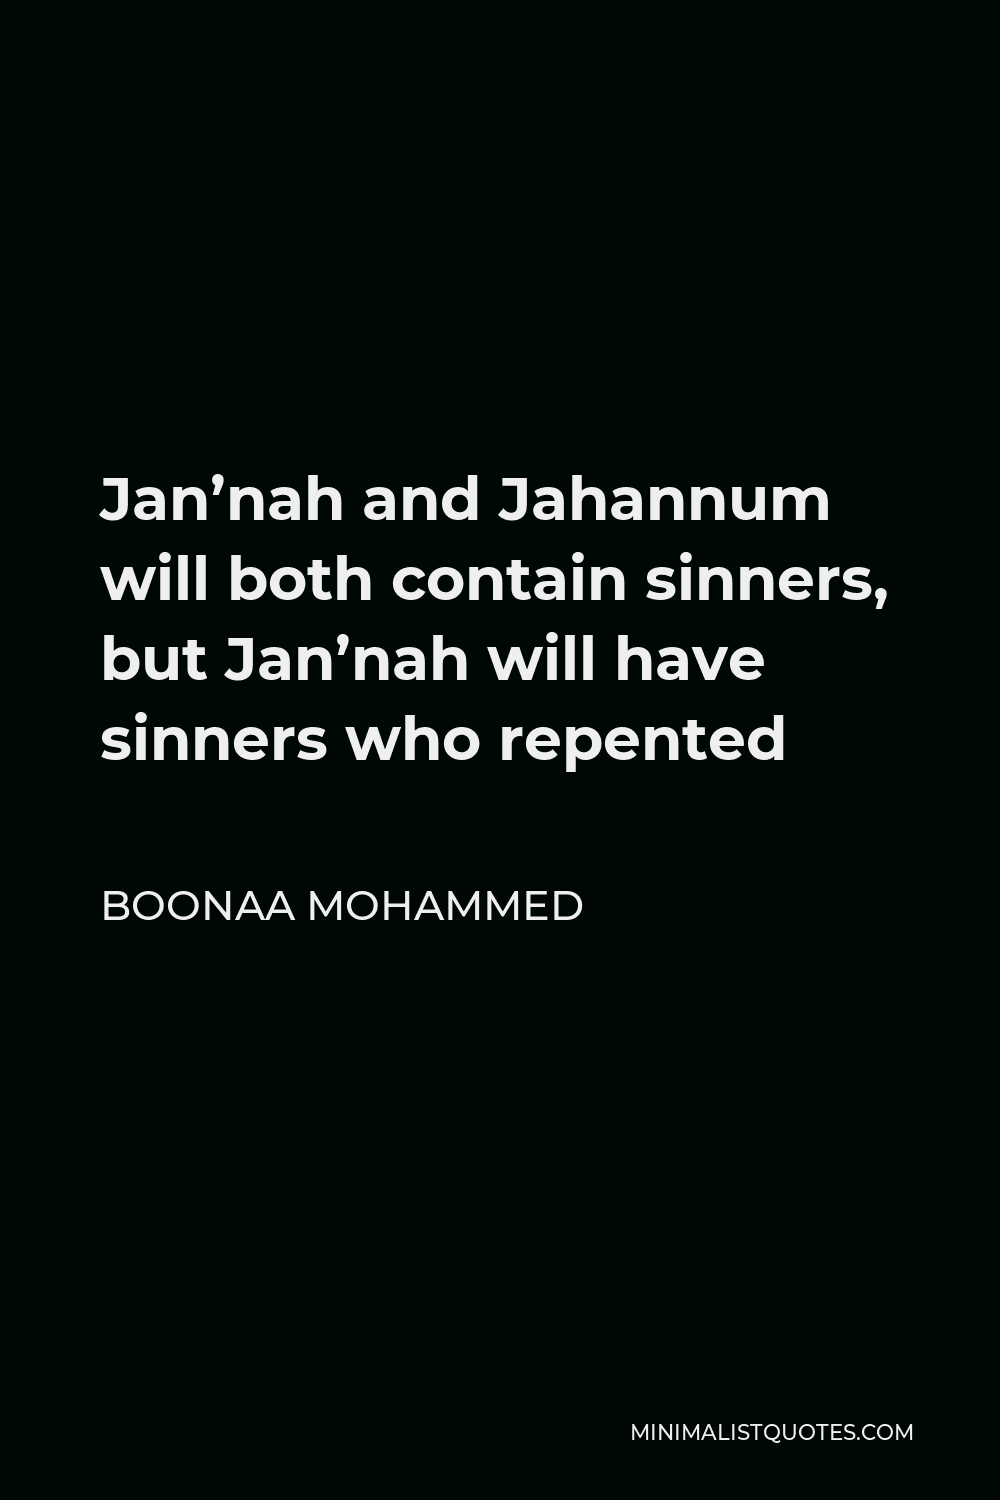 Boonaa Mohammed Quote - Jan’nah and Jahannum will both contain sinners, but Jan’nah will have sinners who repented